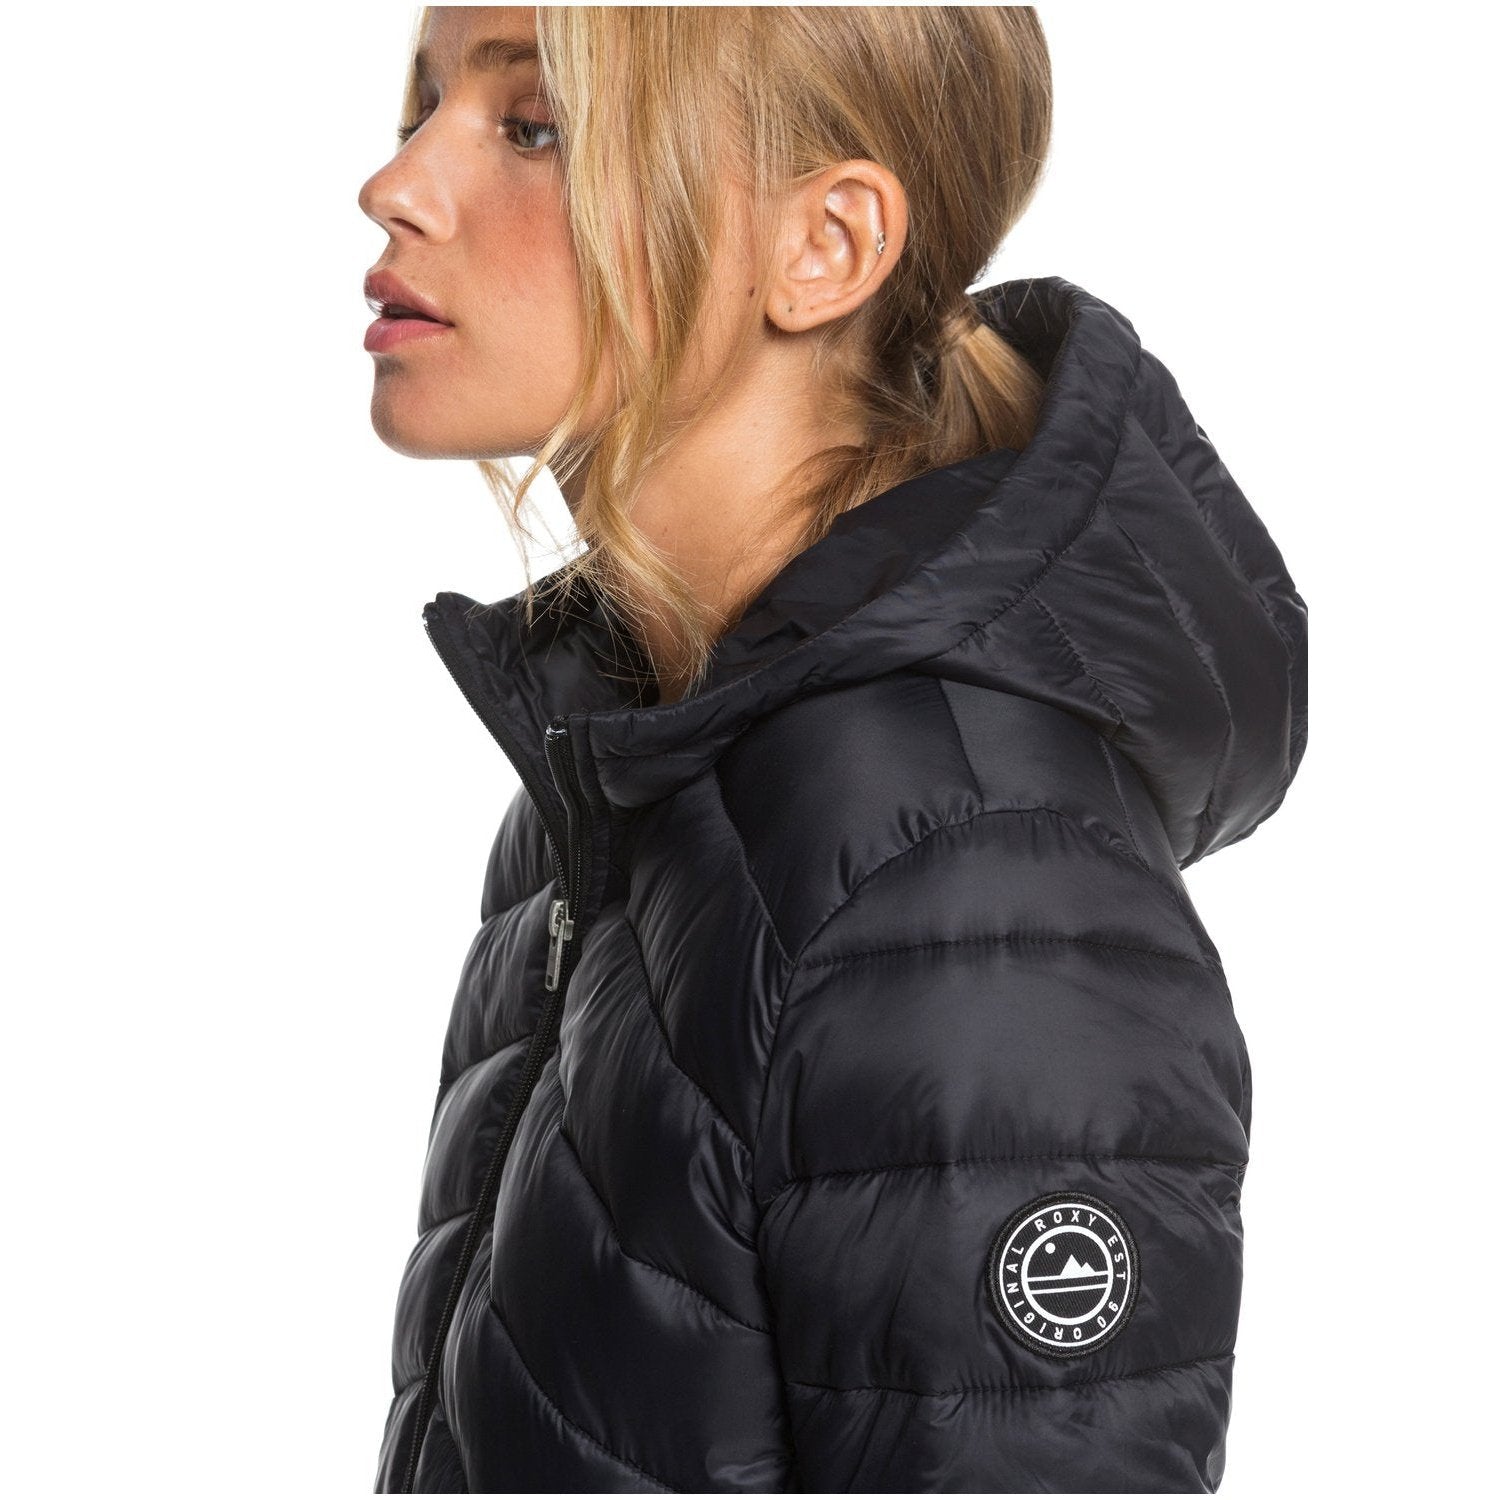 Coast Road - Lightweight Packable Padded Jacket for Women - Sporty Pro